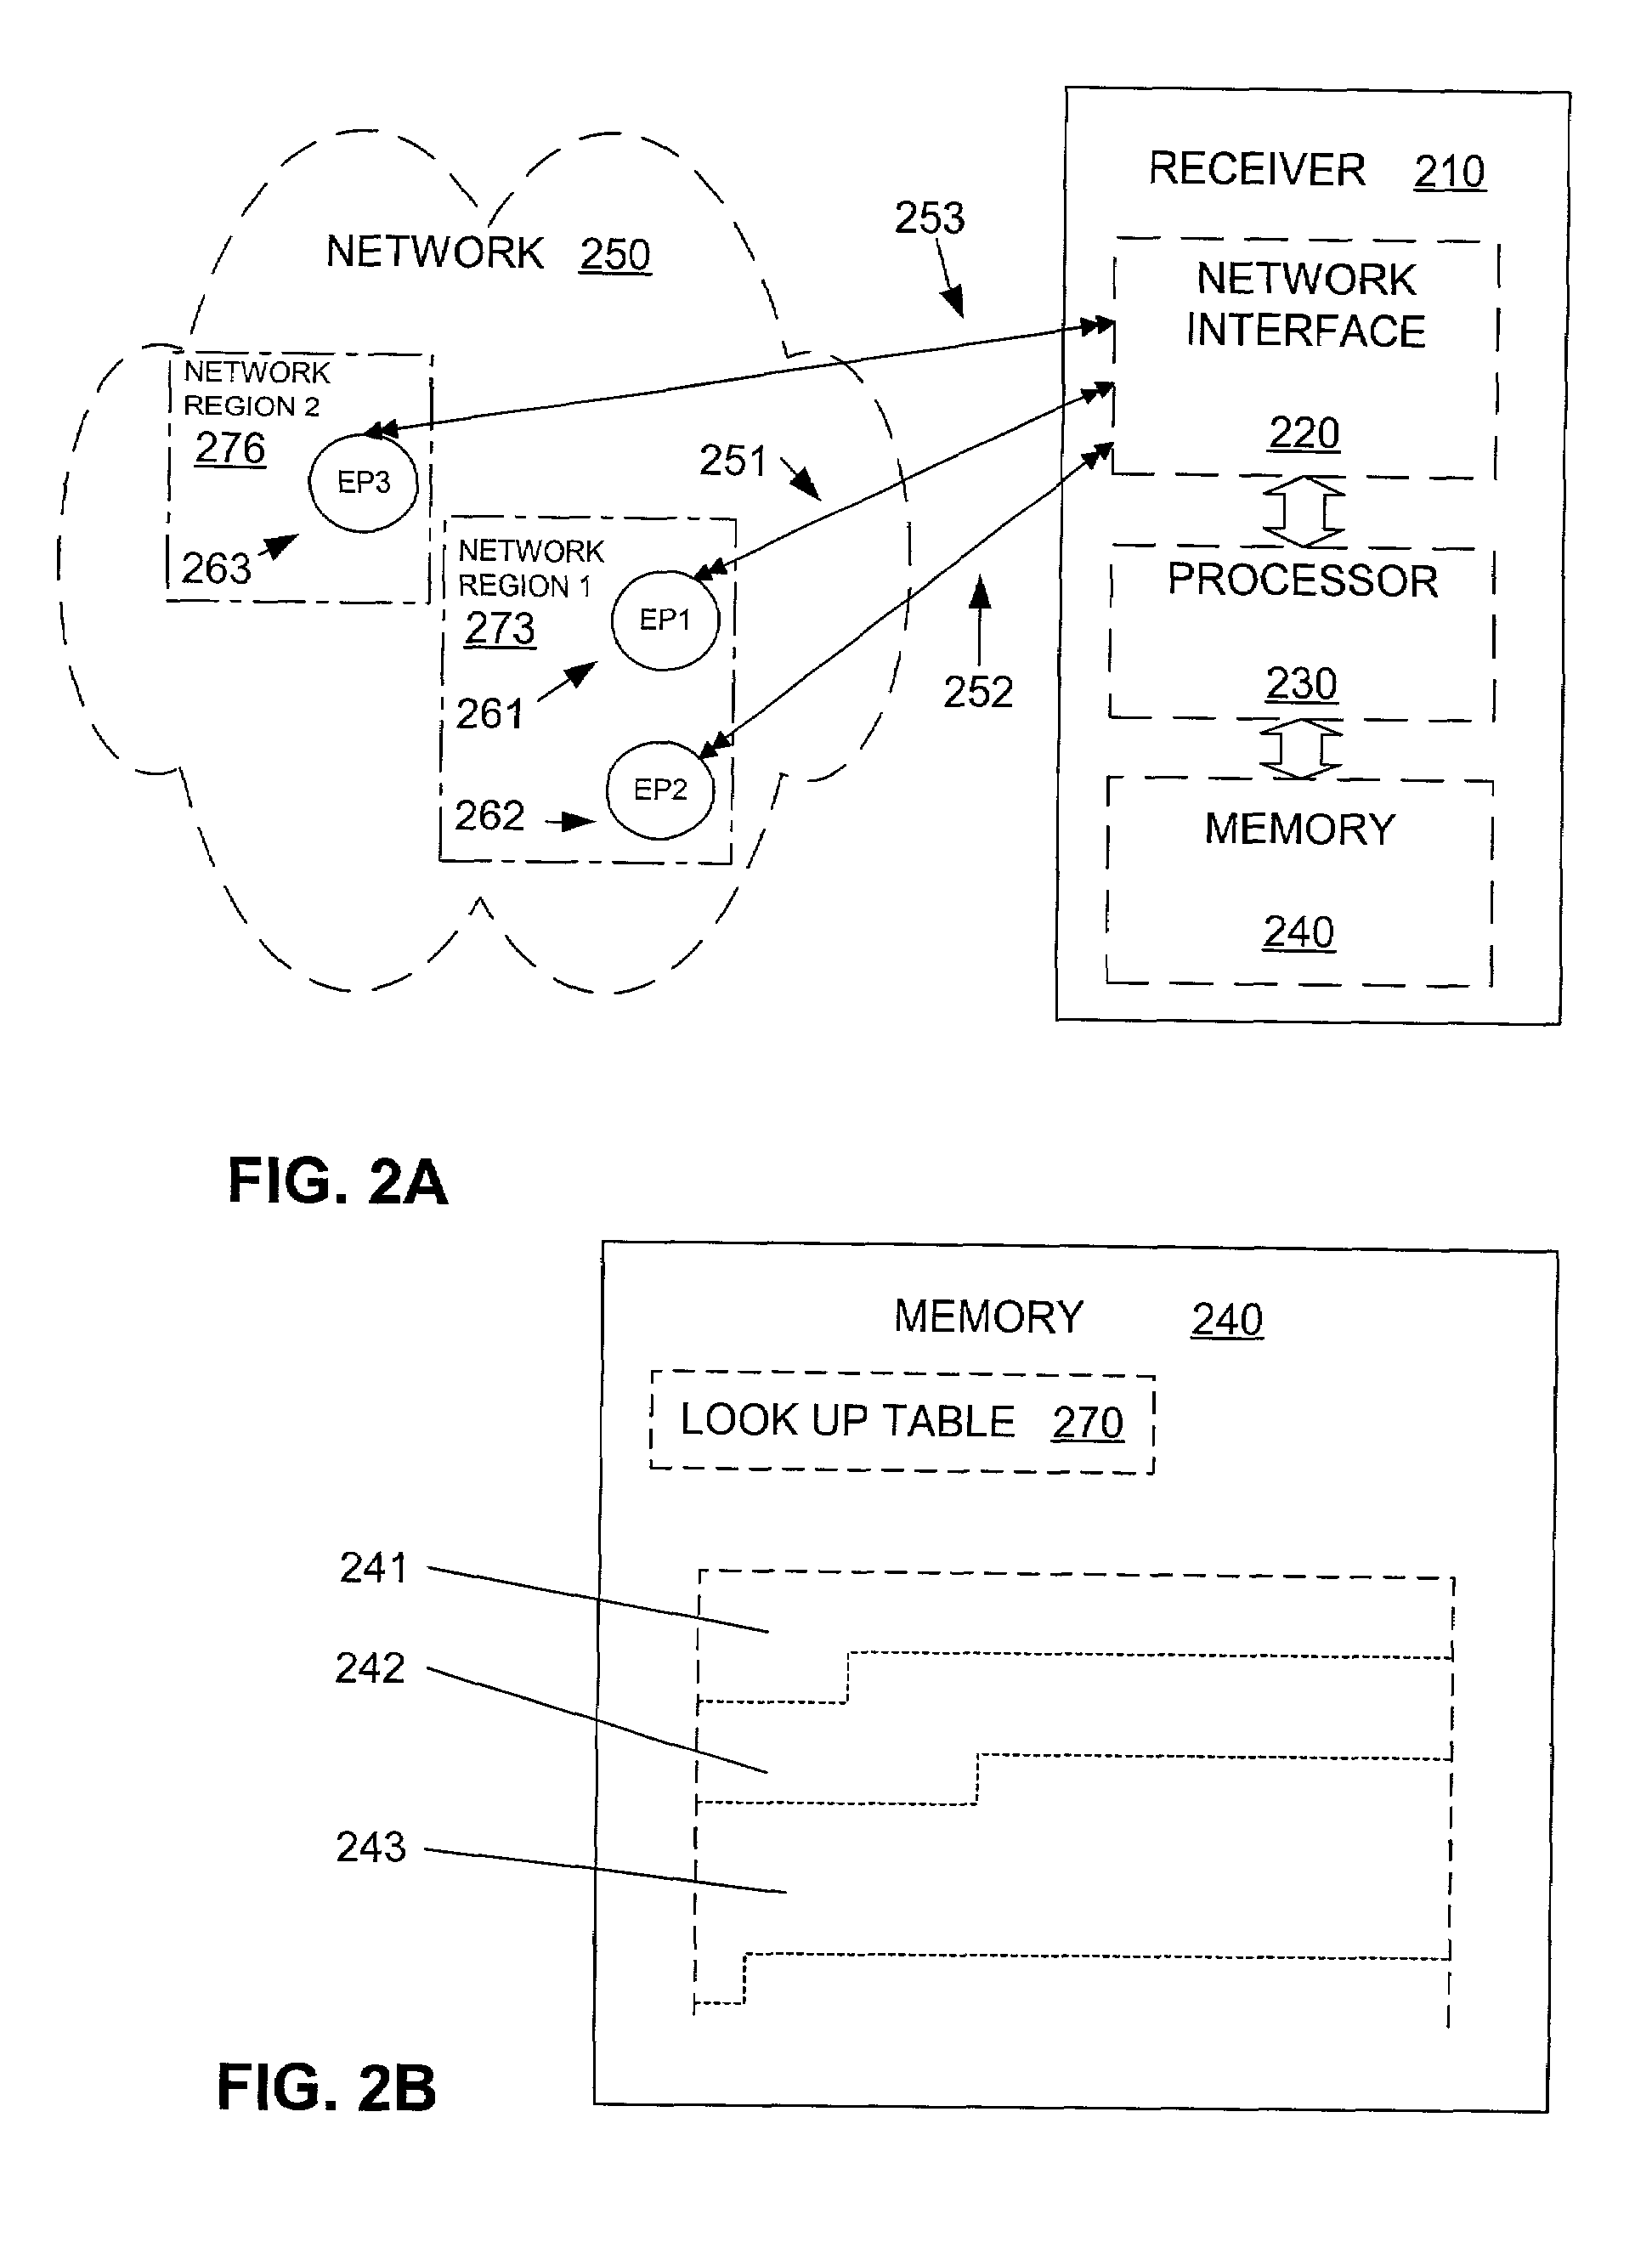 Devices, software and methods for allocating jitter buffer memory based on network region of network endpoint